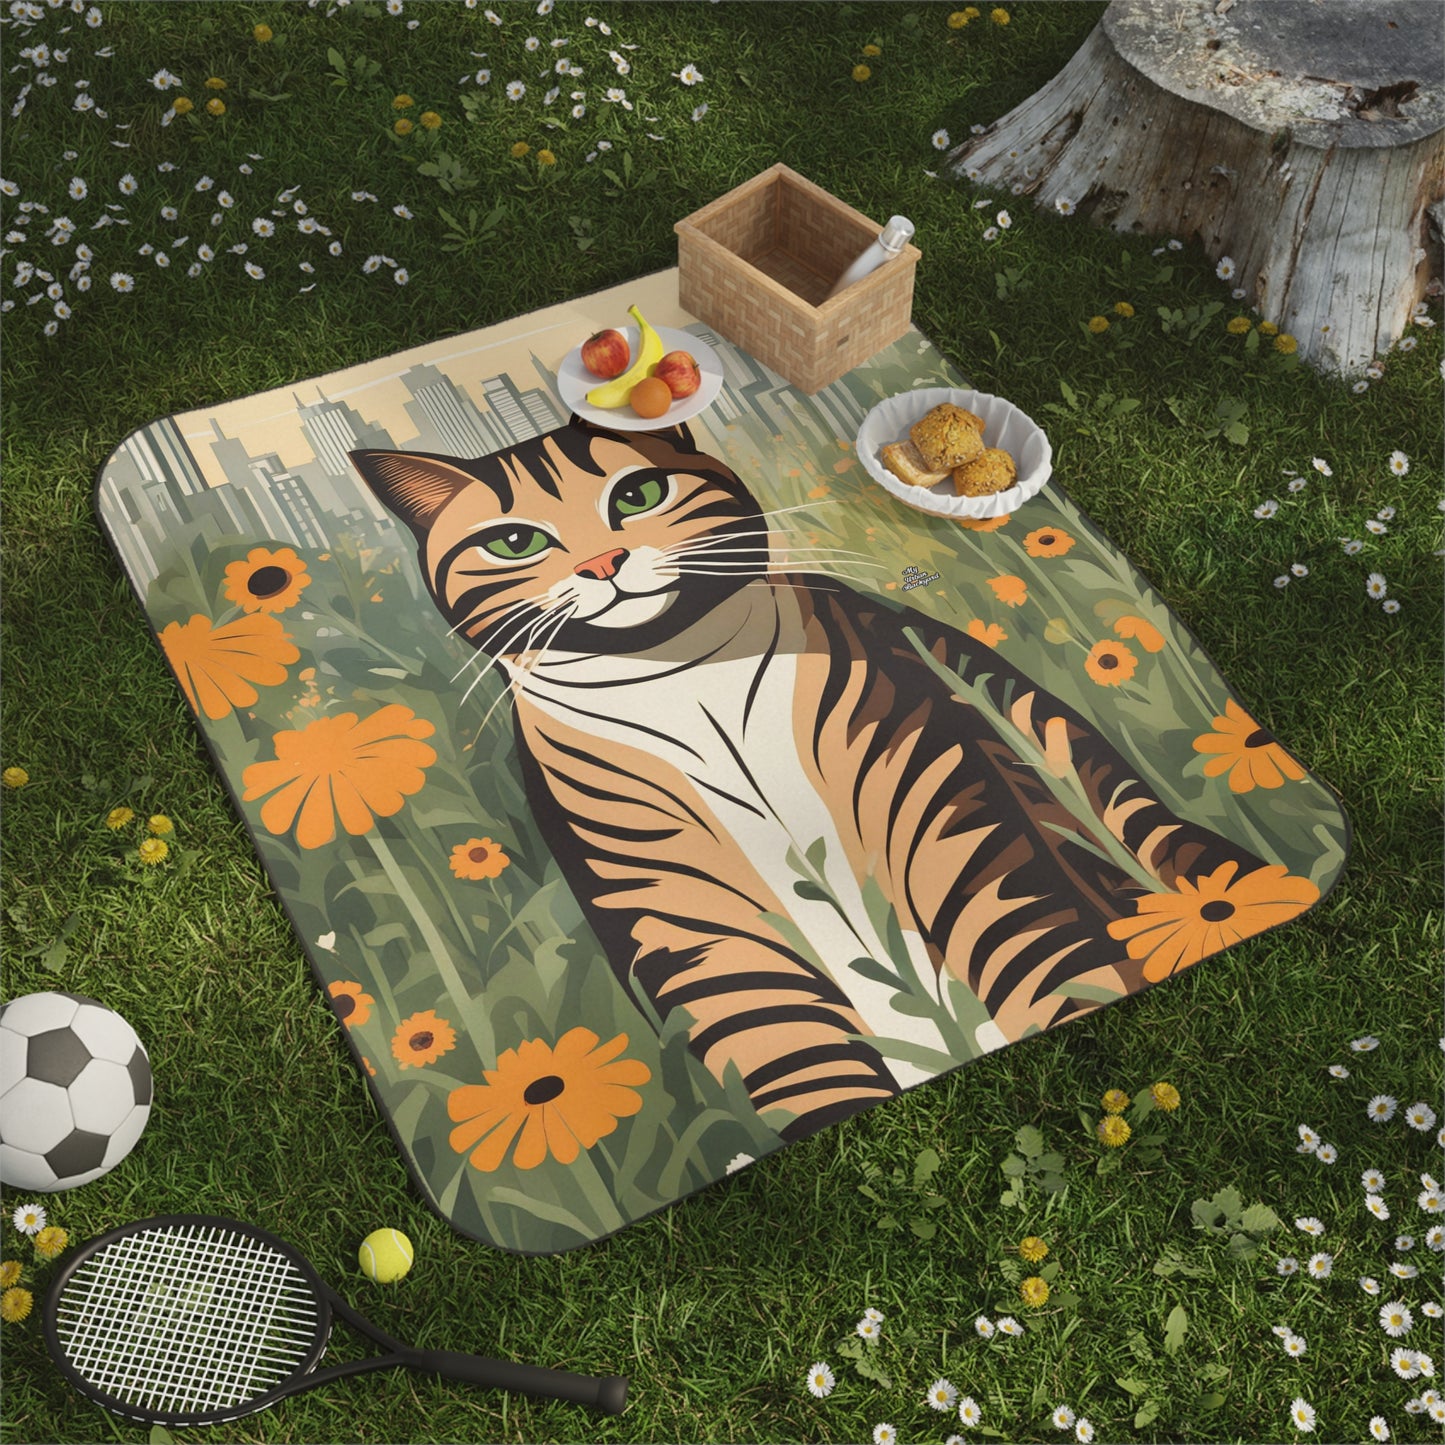 City Tabby, Cozy Outdoor Picnic Blanket, Water-Resistant Bottom, 51" × 61"